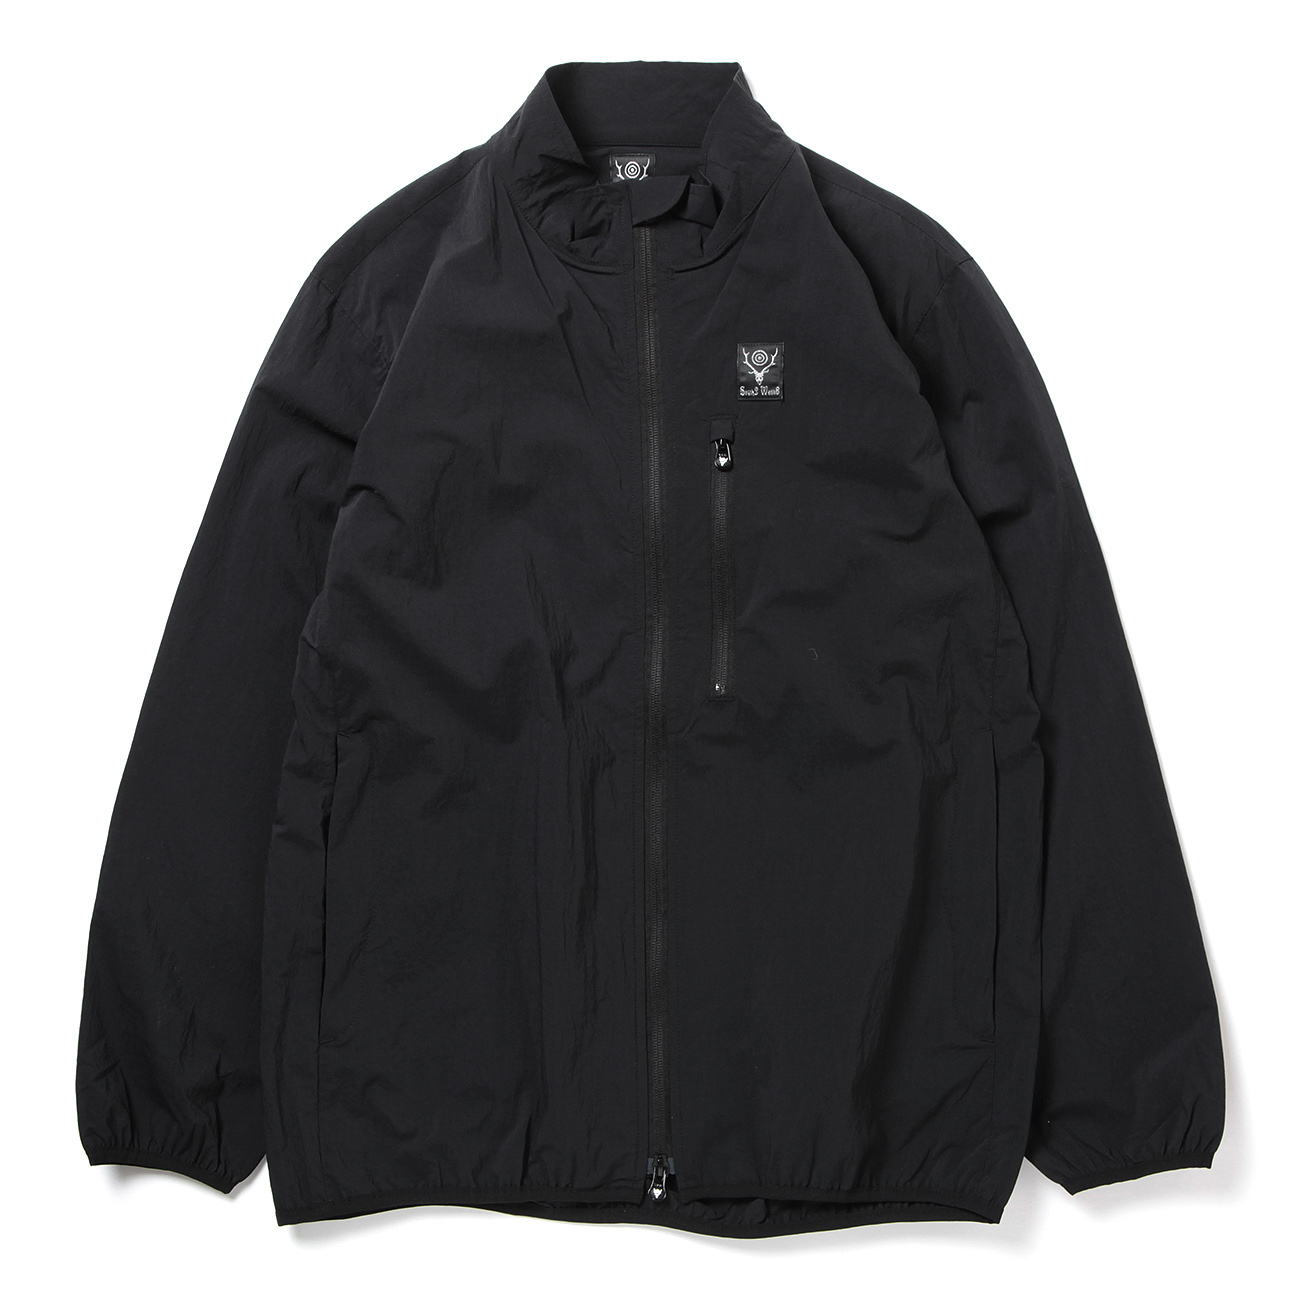 SOUTH2 WEST8 PACKABLE JACKET M ブラックナイロンジャケット ...